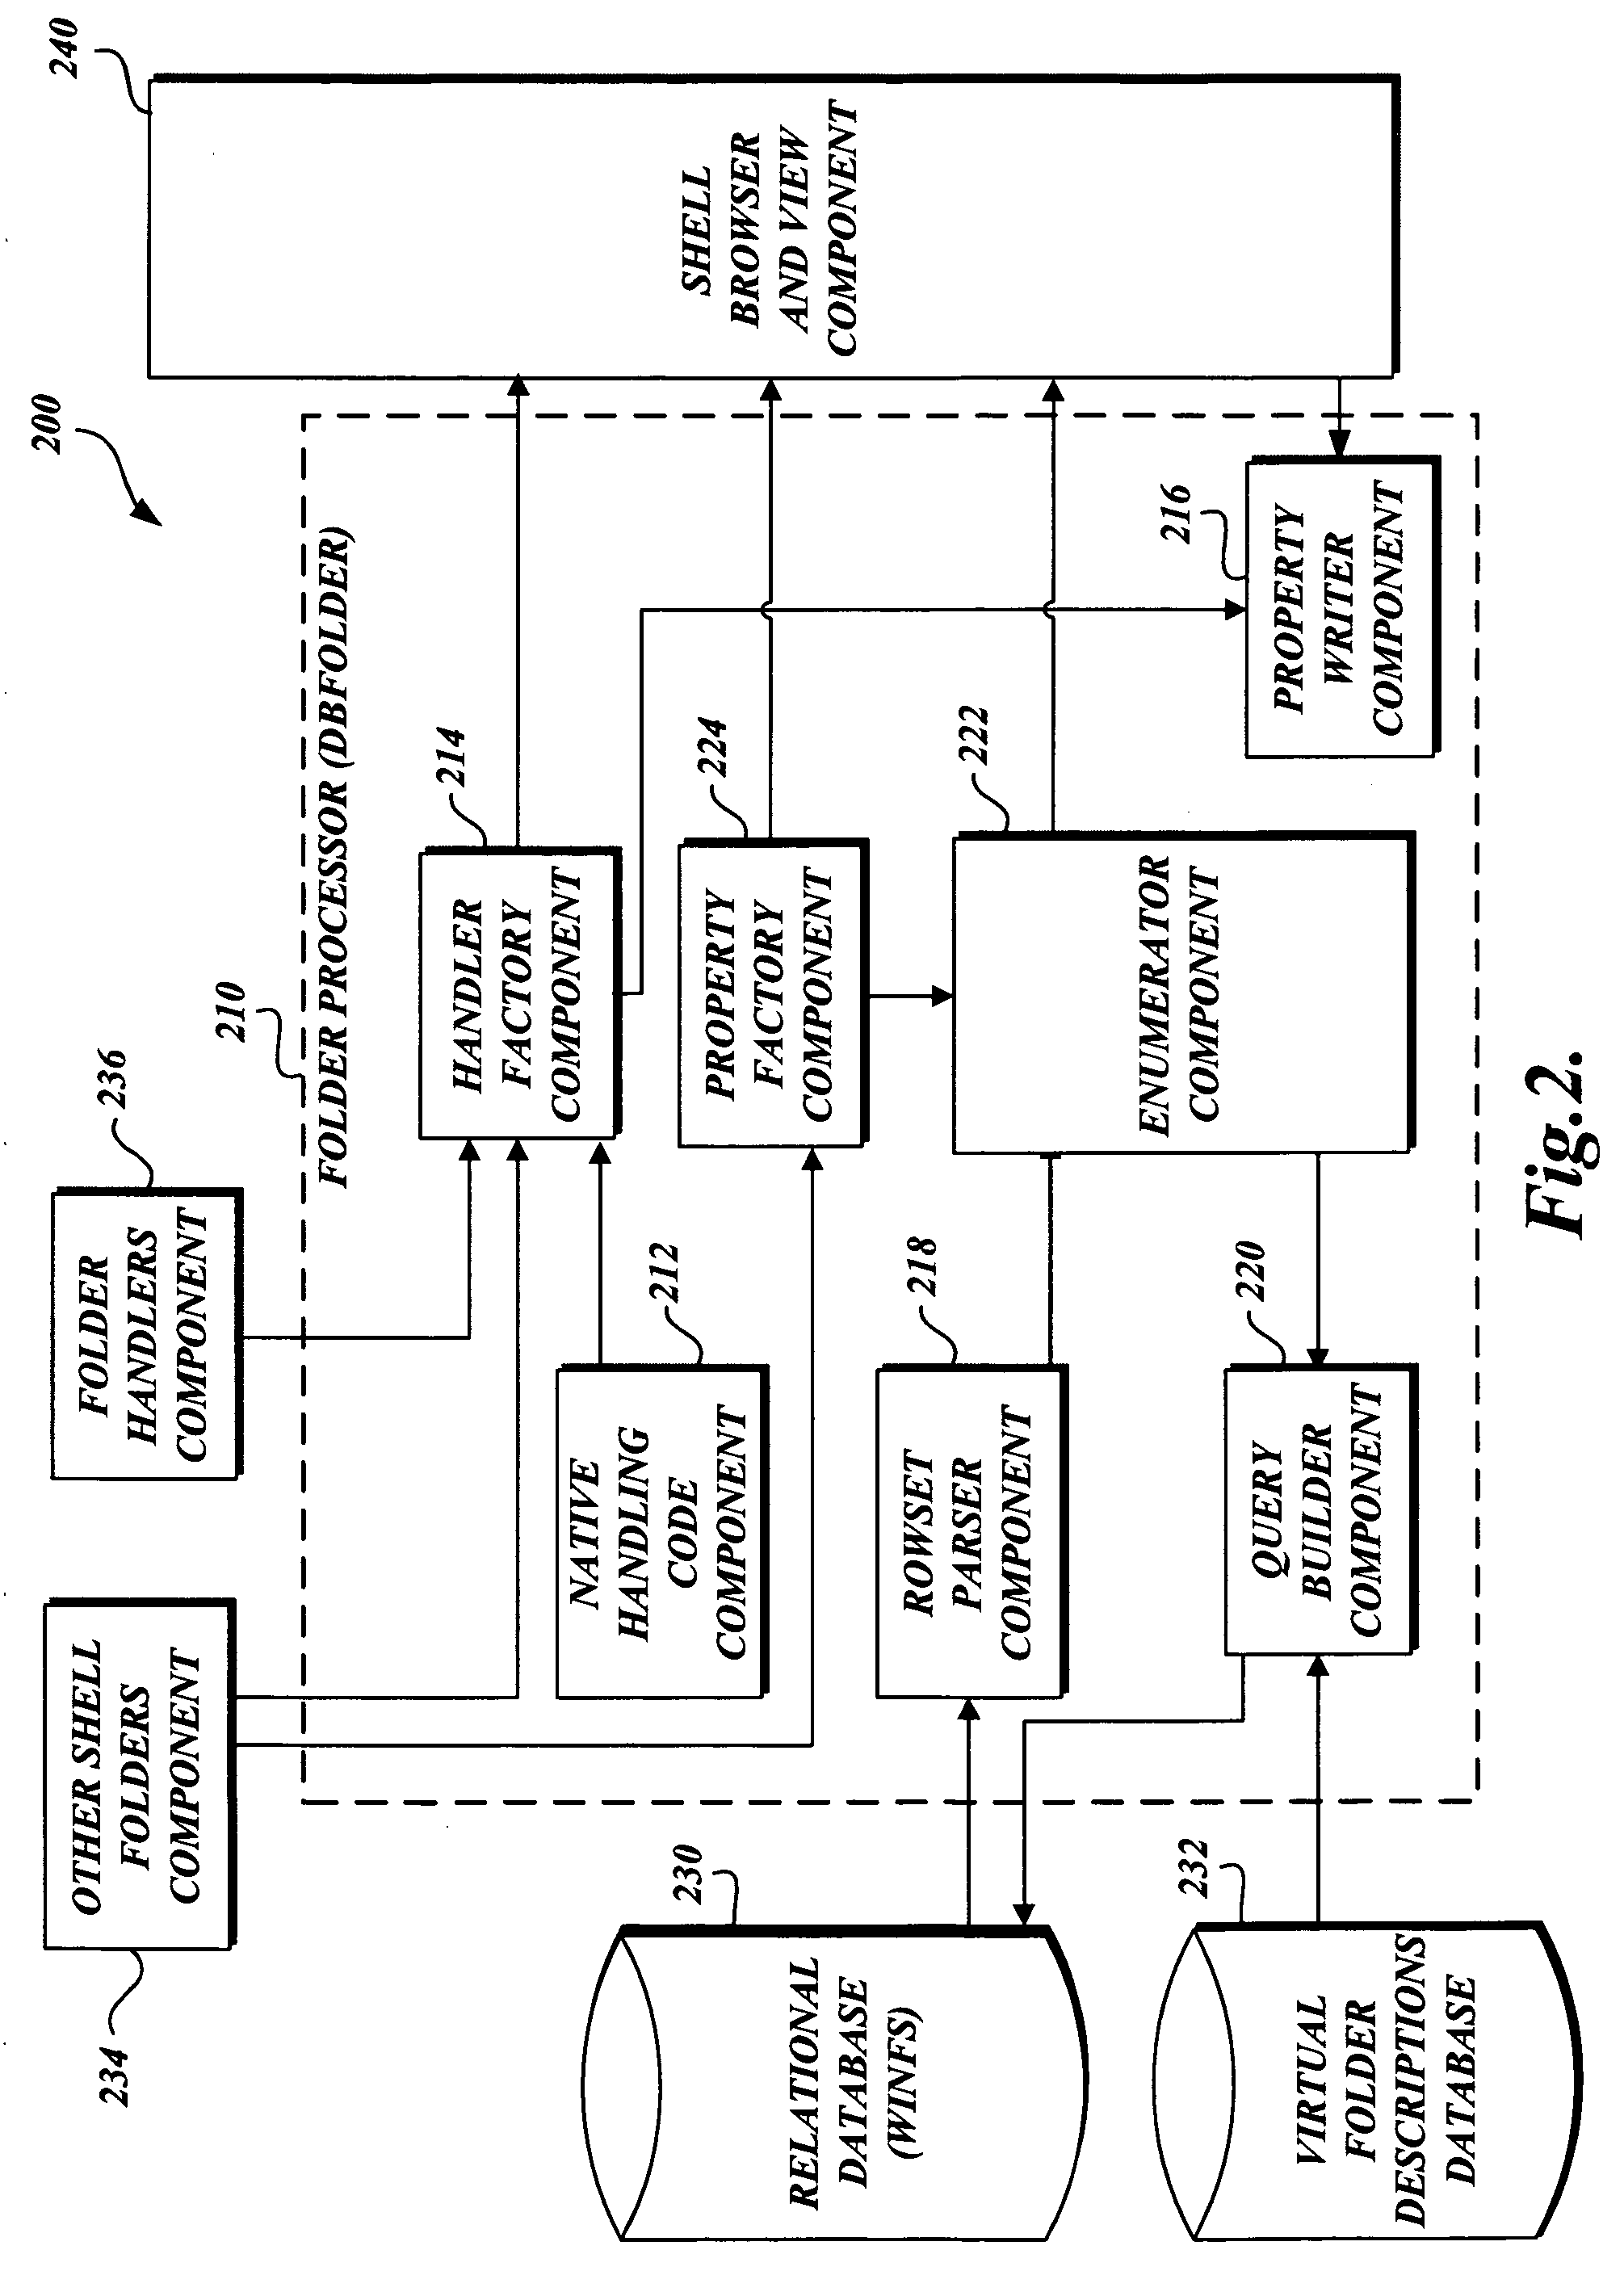 System and method for filtering and organizing items based on common elements